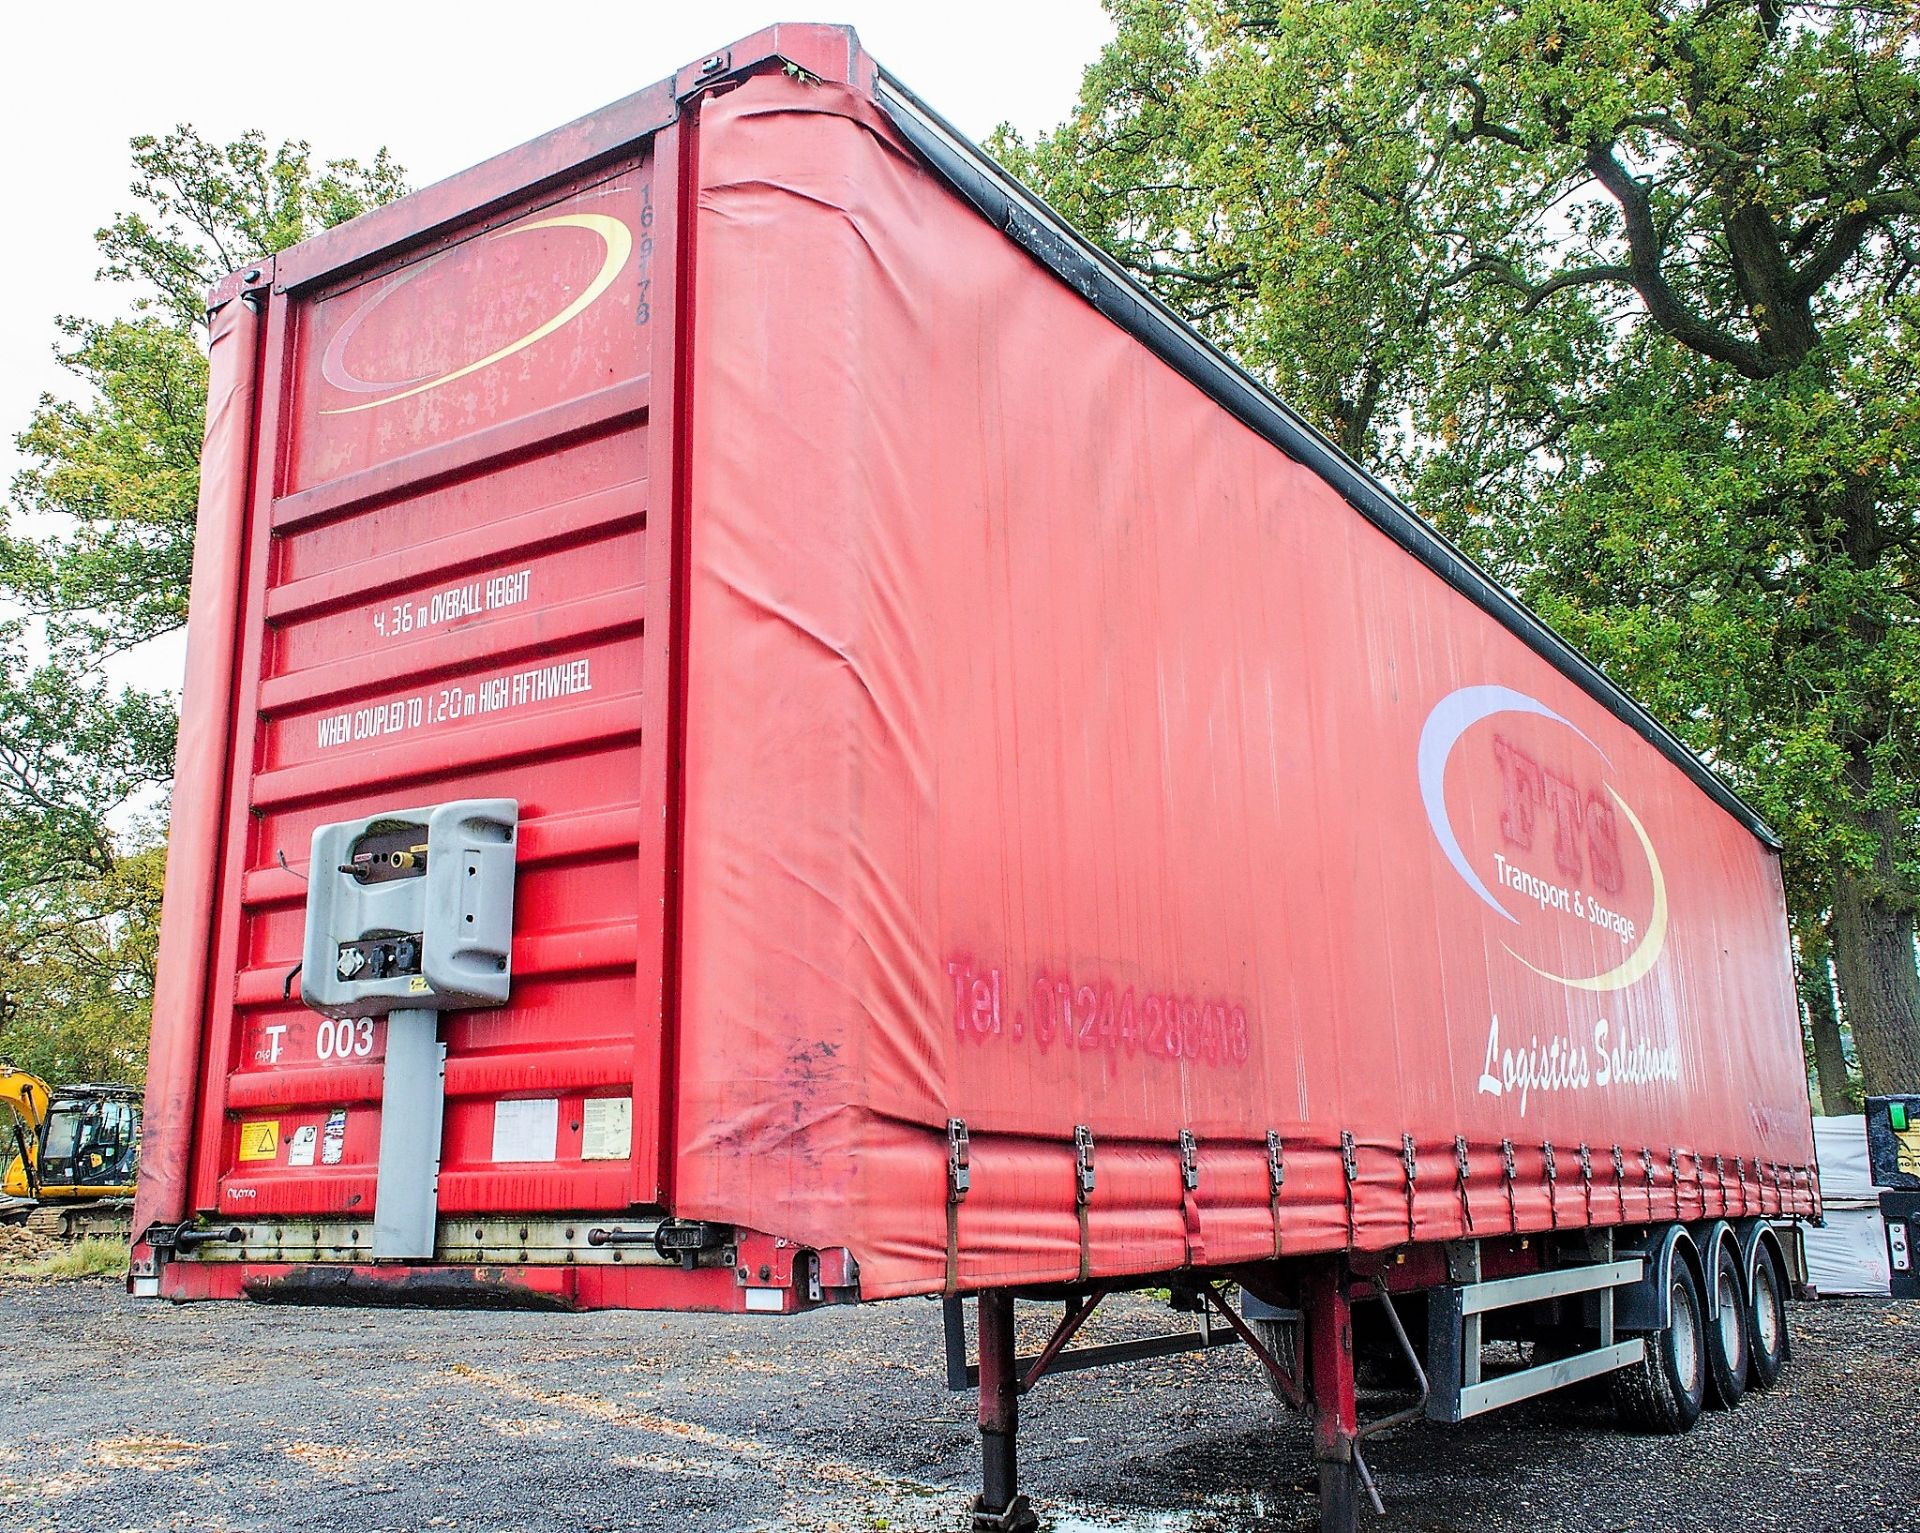 Fruehauf 13.6 metre tri axle curtain sided trailer Year: 2003 Identification Number: C140710 S/N: - Image 2 of 12